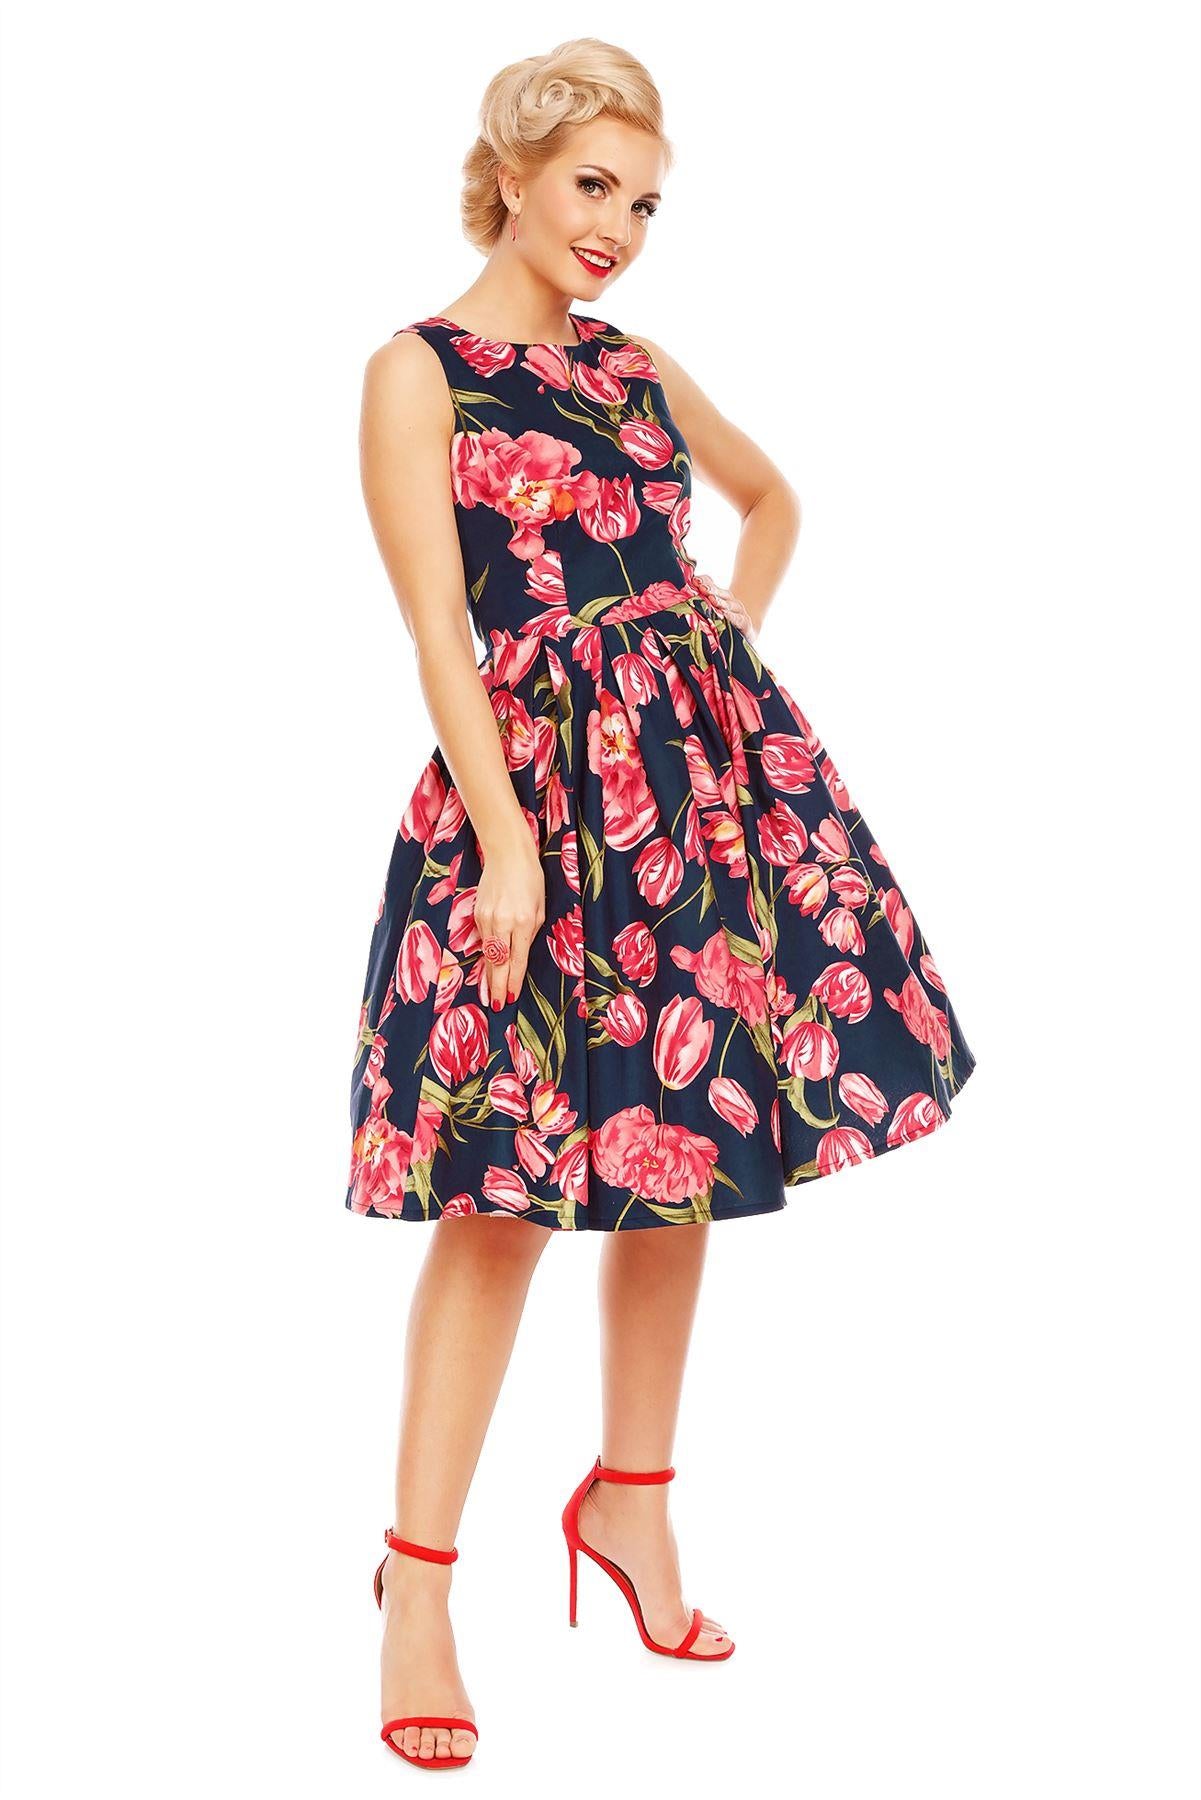 Retro Tulip Floral Swing Dress in Blue-Pink